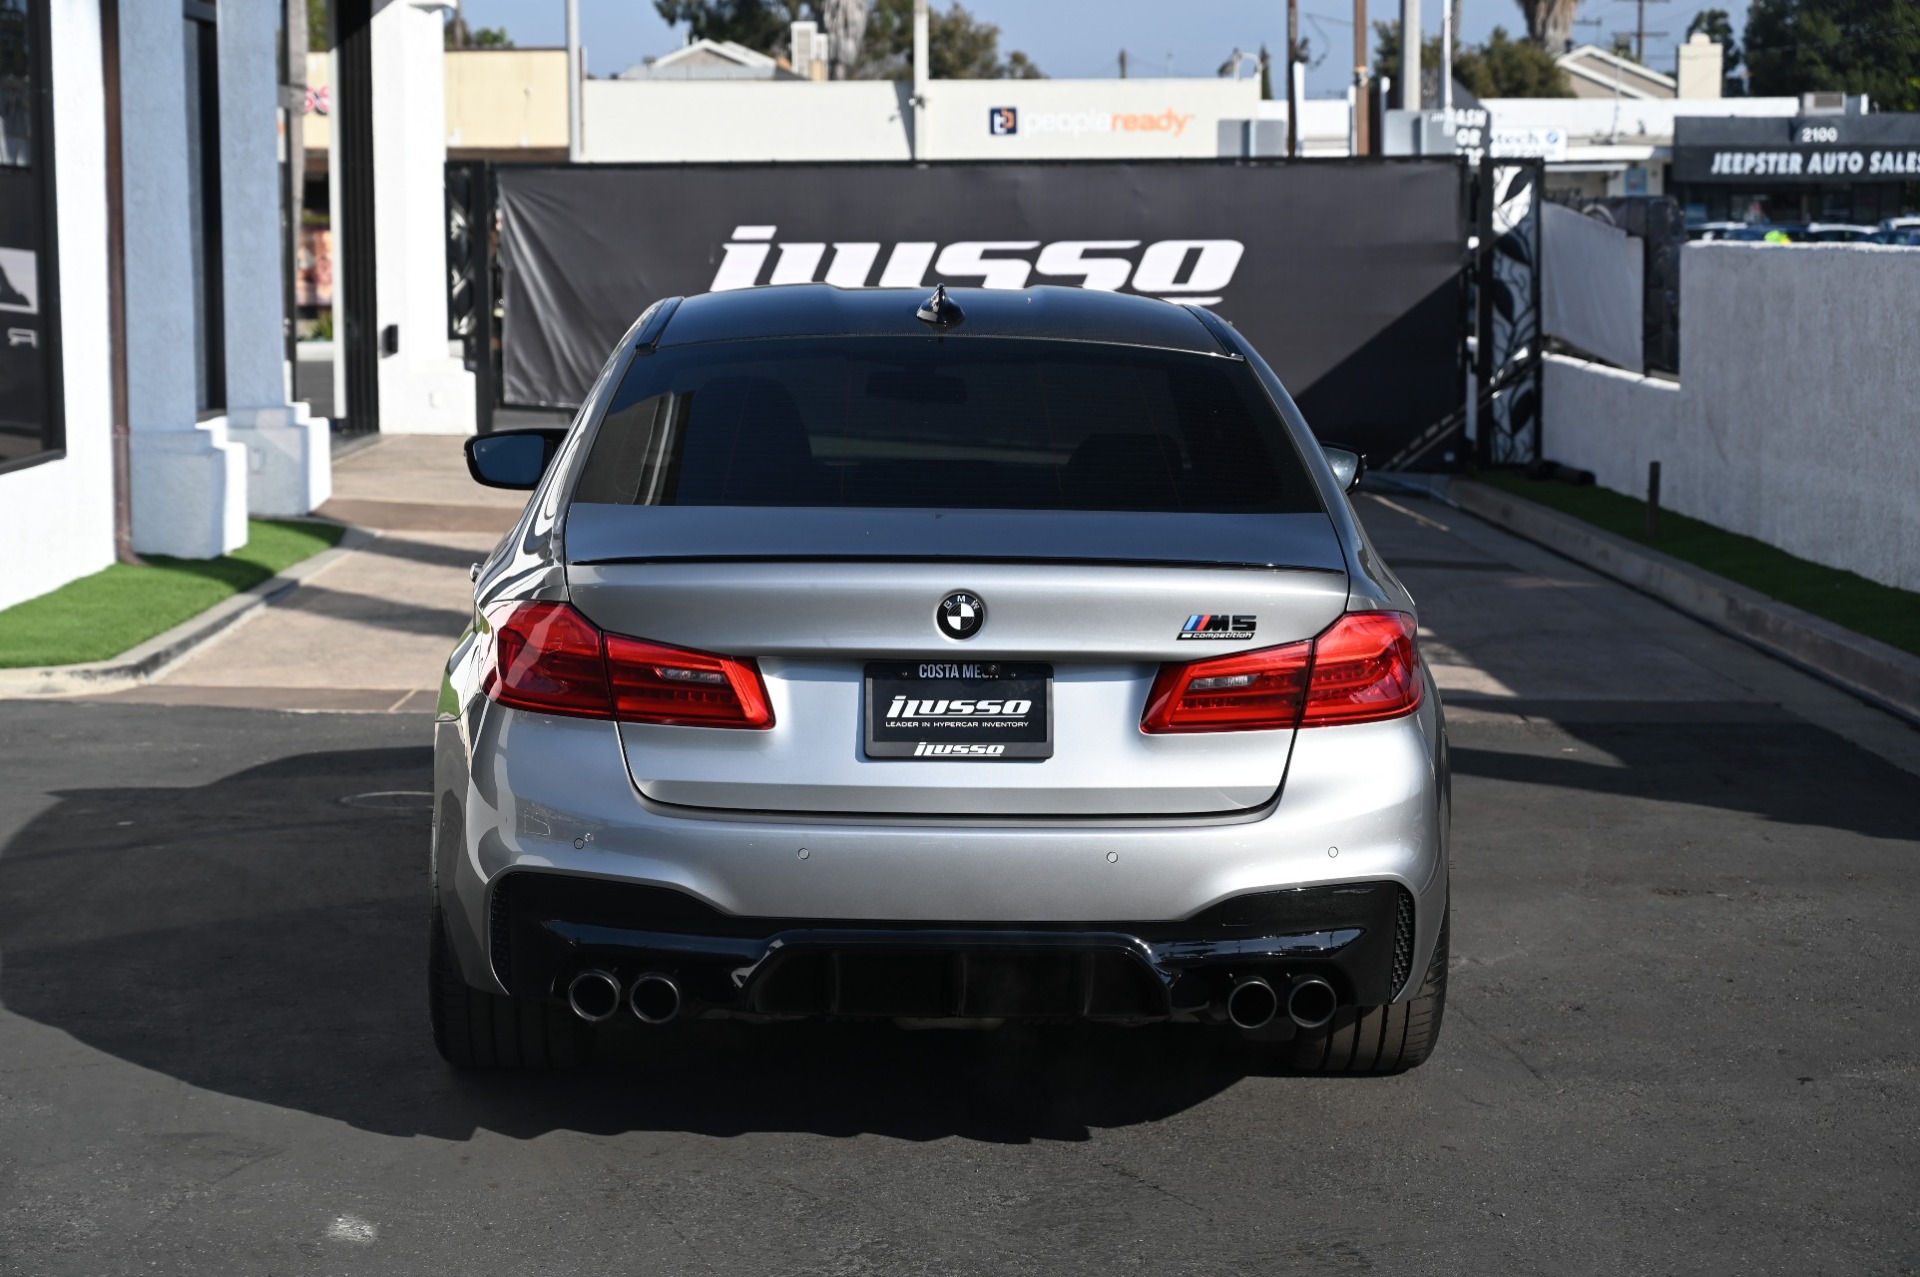 Used 2007 BMW M5 For Sale (Sold)  West Coast Exotic Cars Stock #C1175